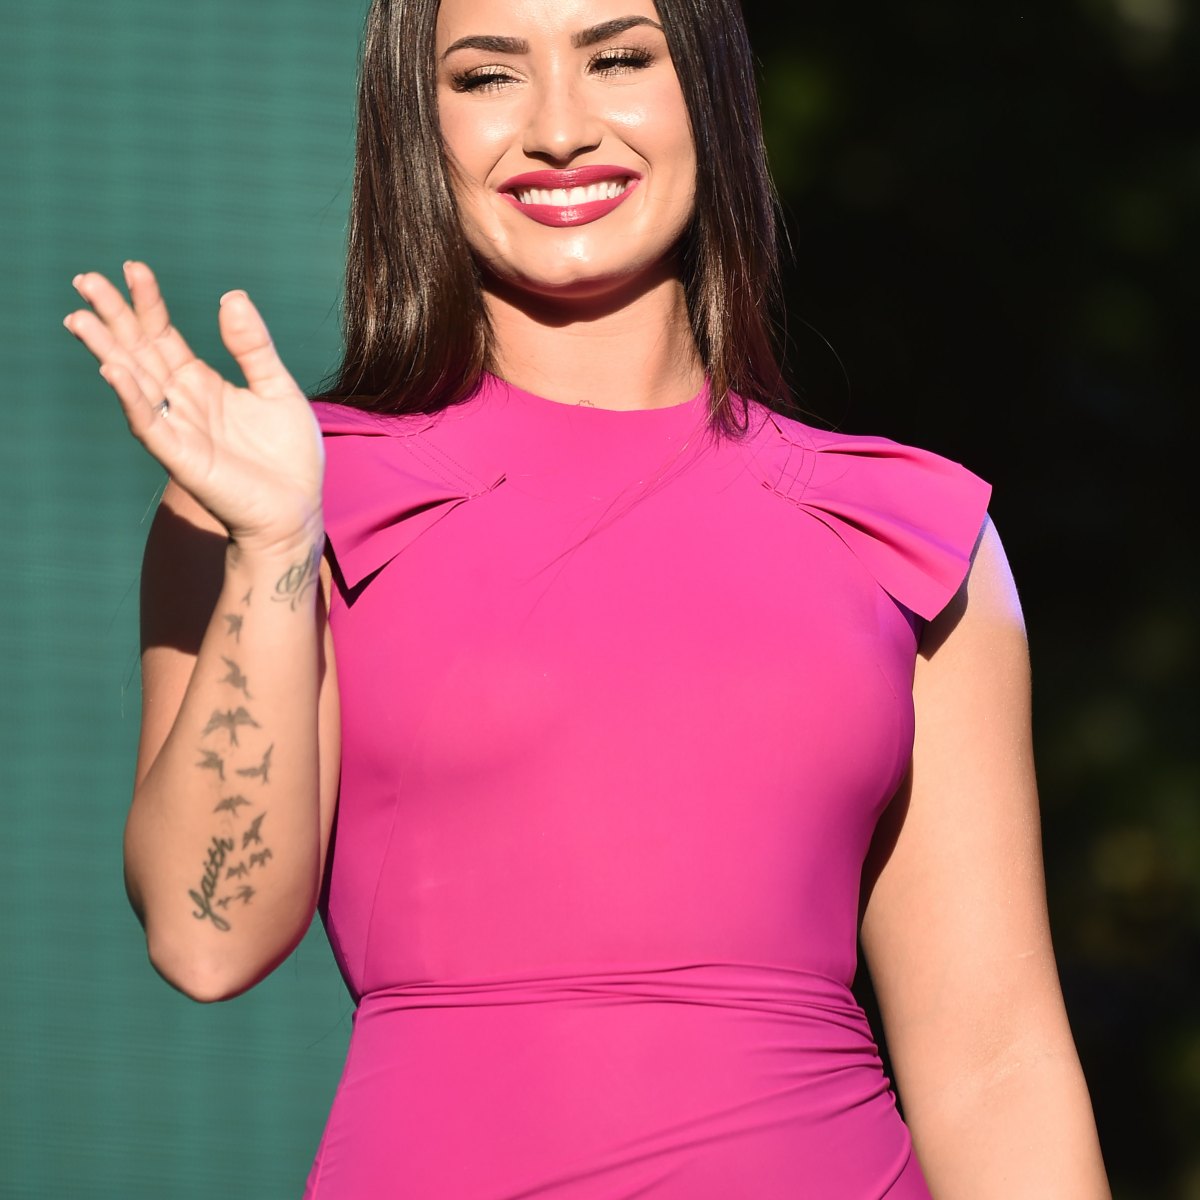 Demi Lovato Tattoos: Guide to Ink Designs and Their Meanings